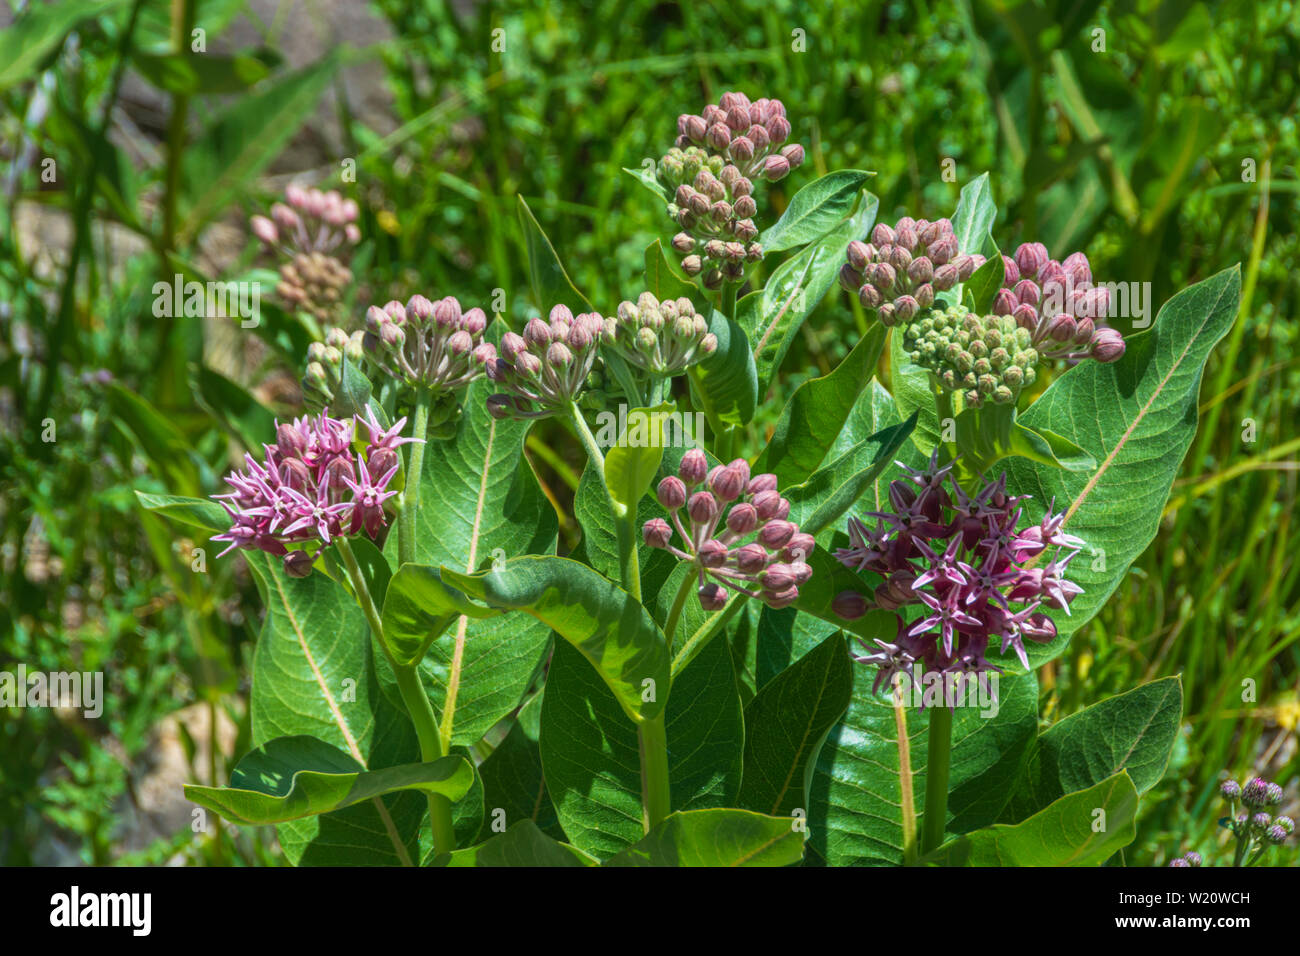 Showy Milkweed (Asclepias speciosa) plant flowers blooming in June, Castle Rock Colorado US. Stock Photo